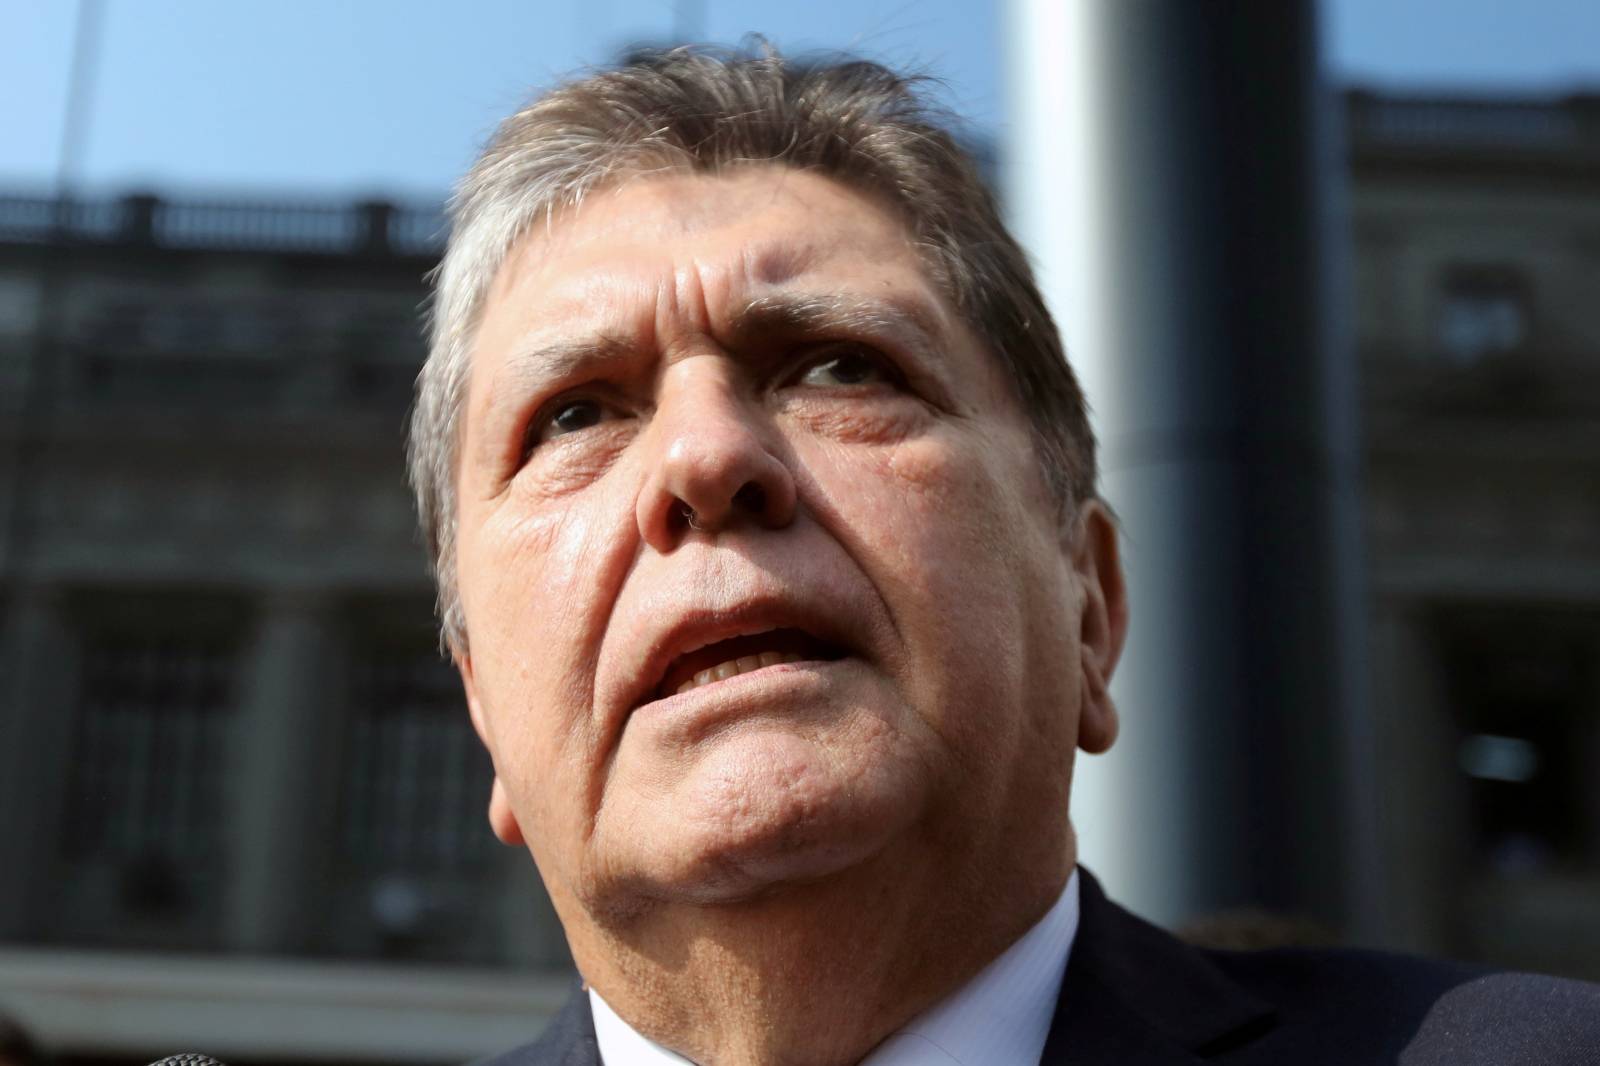 FILE PHOTO: Former Peruvian president Alan Garcia talks to the media as he arrives at the National Prosecution office in Lima